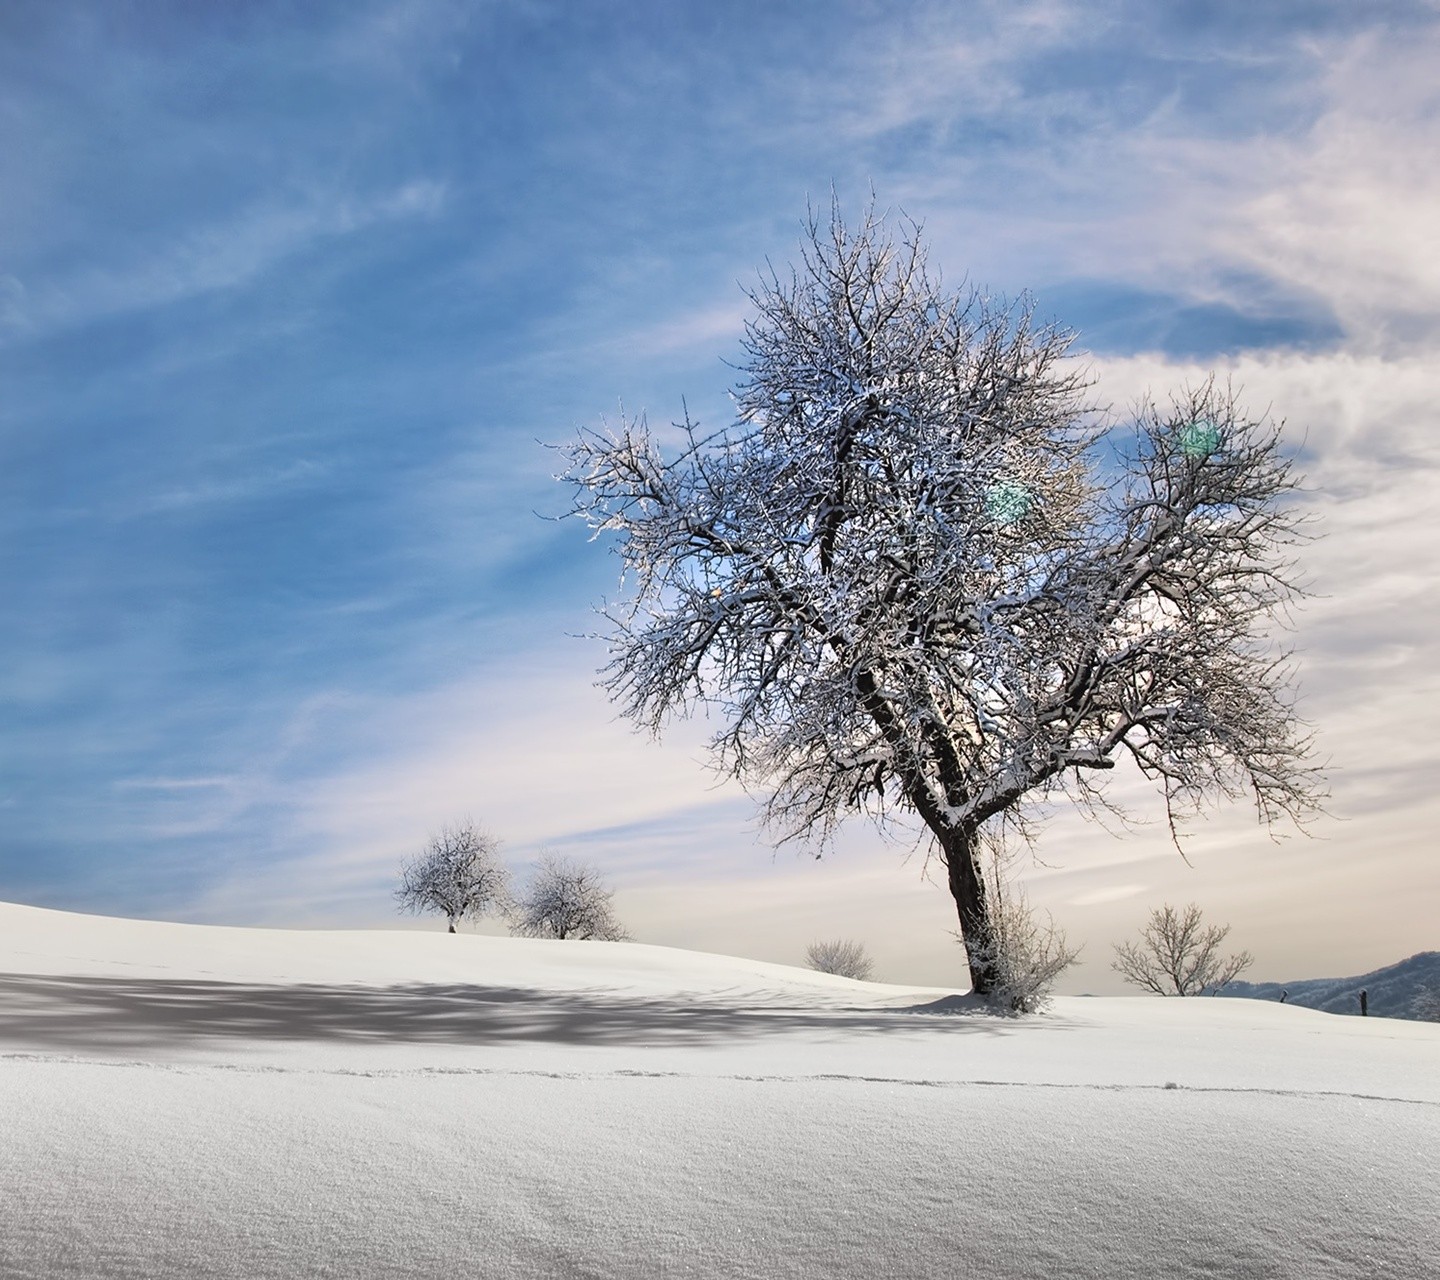 General 1440x1280 trees winter snow outdoors landscape cold